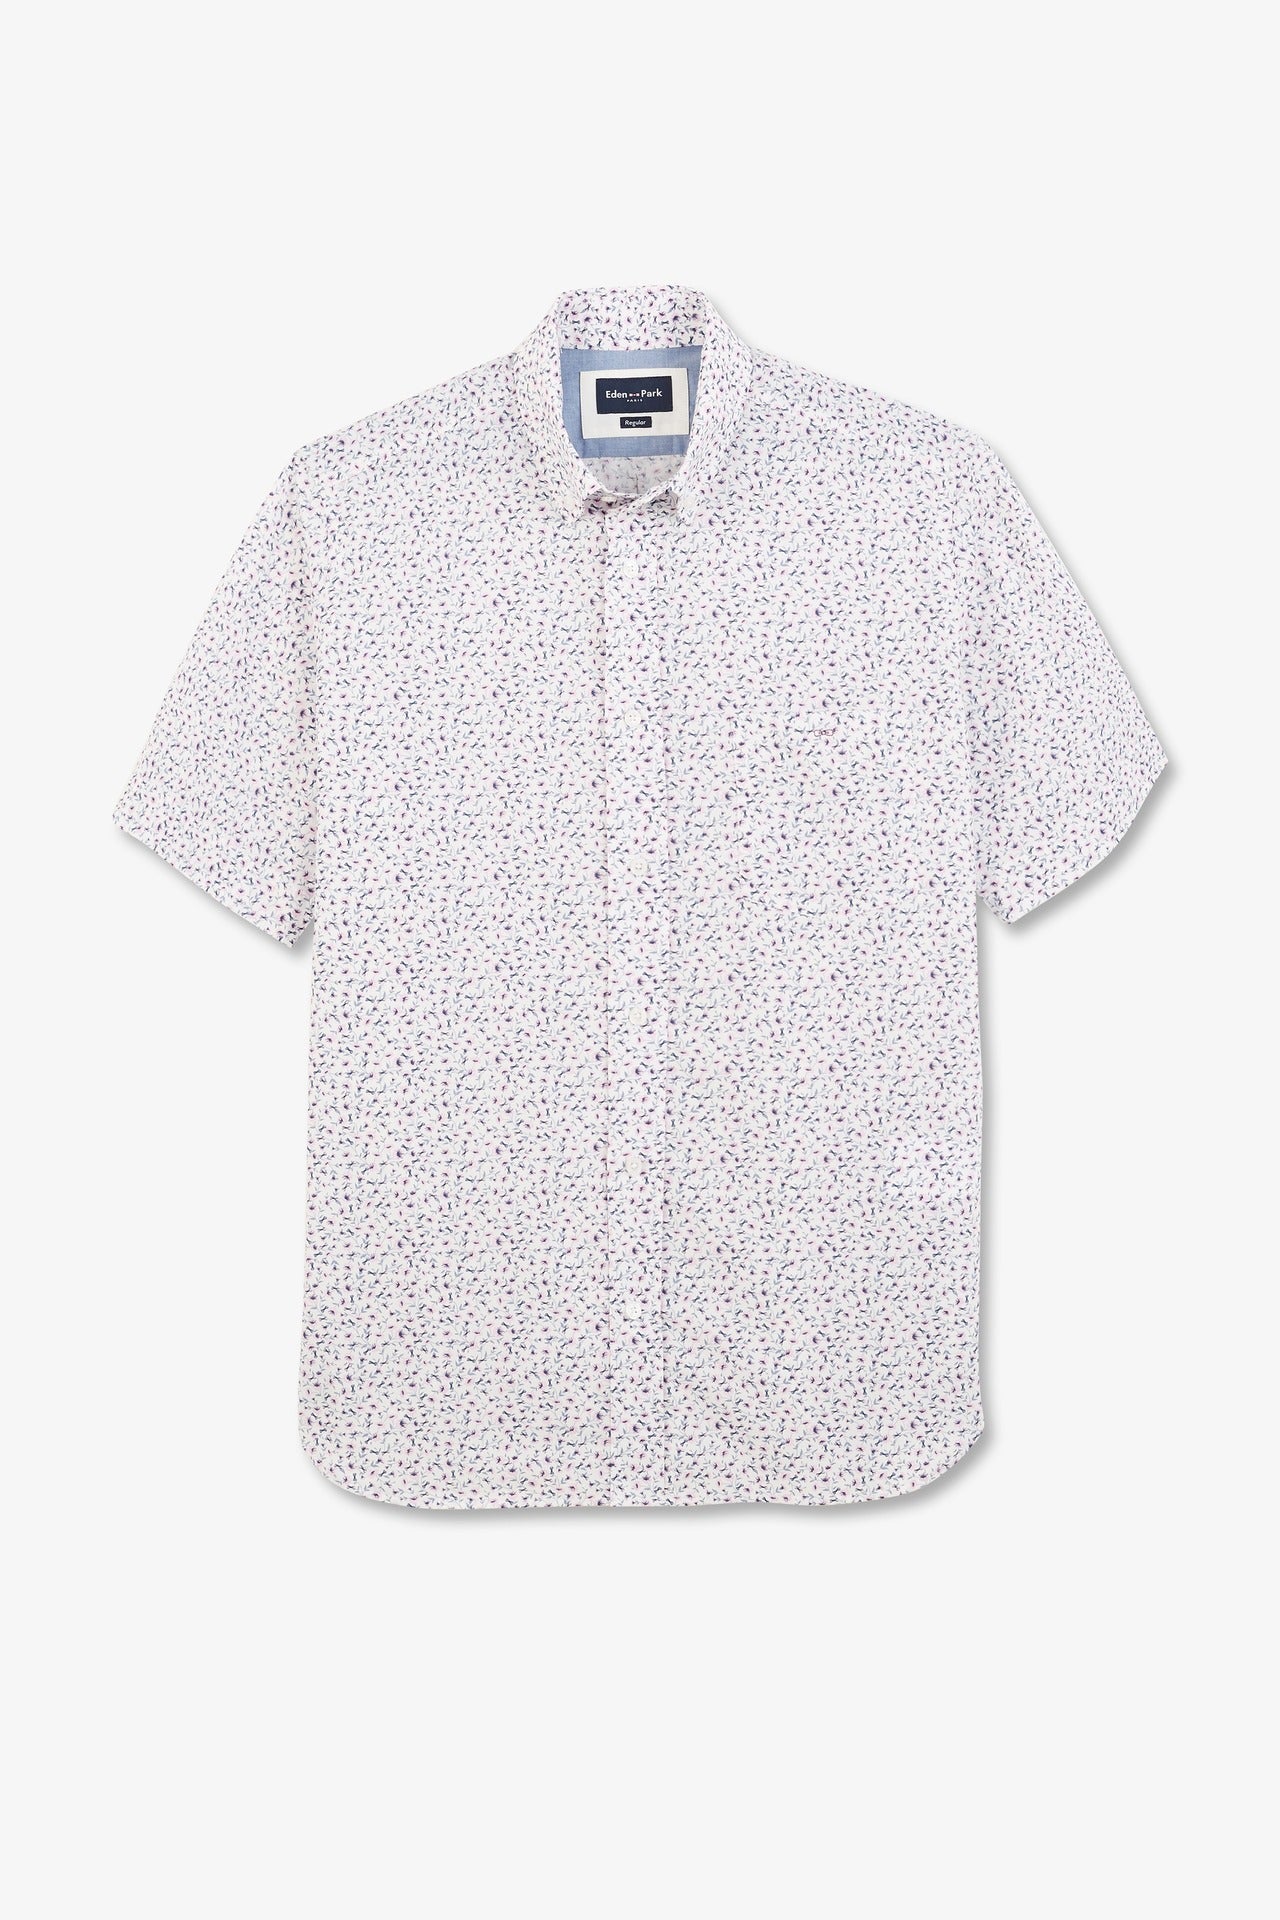 White shirt with exclusive floral print - Image 2